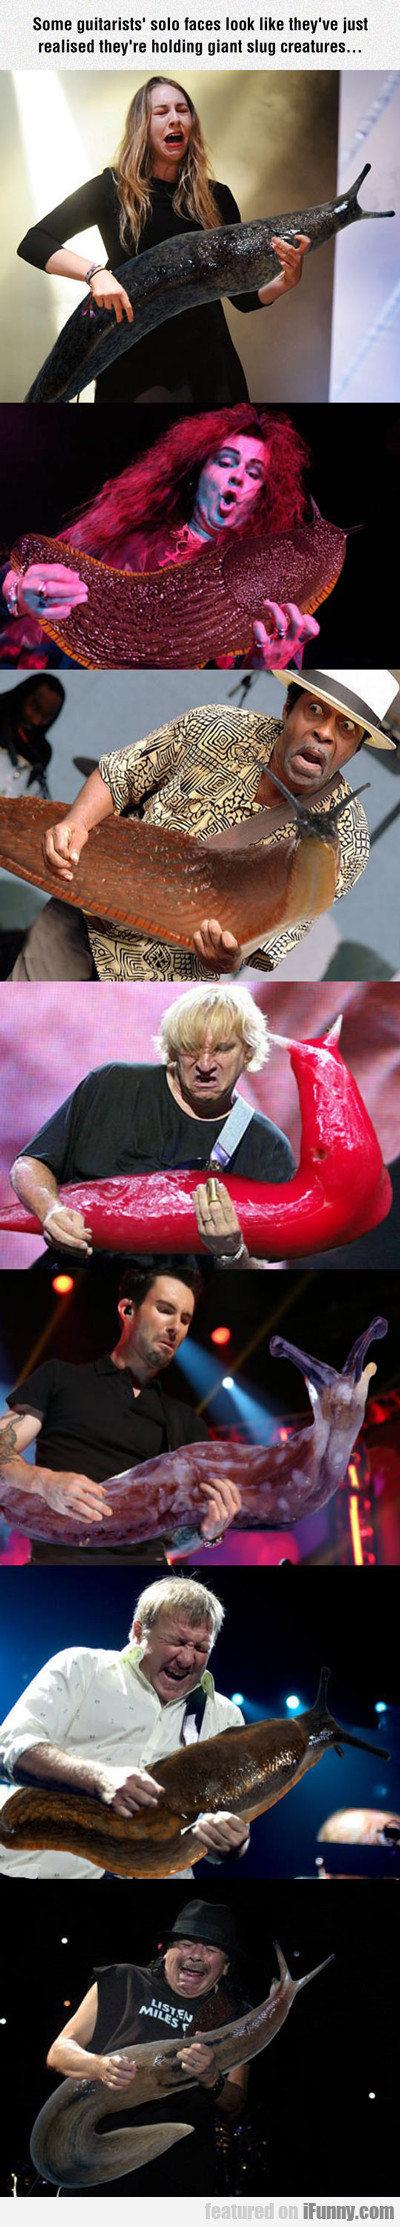 Some Guitarists' Solo Faces...